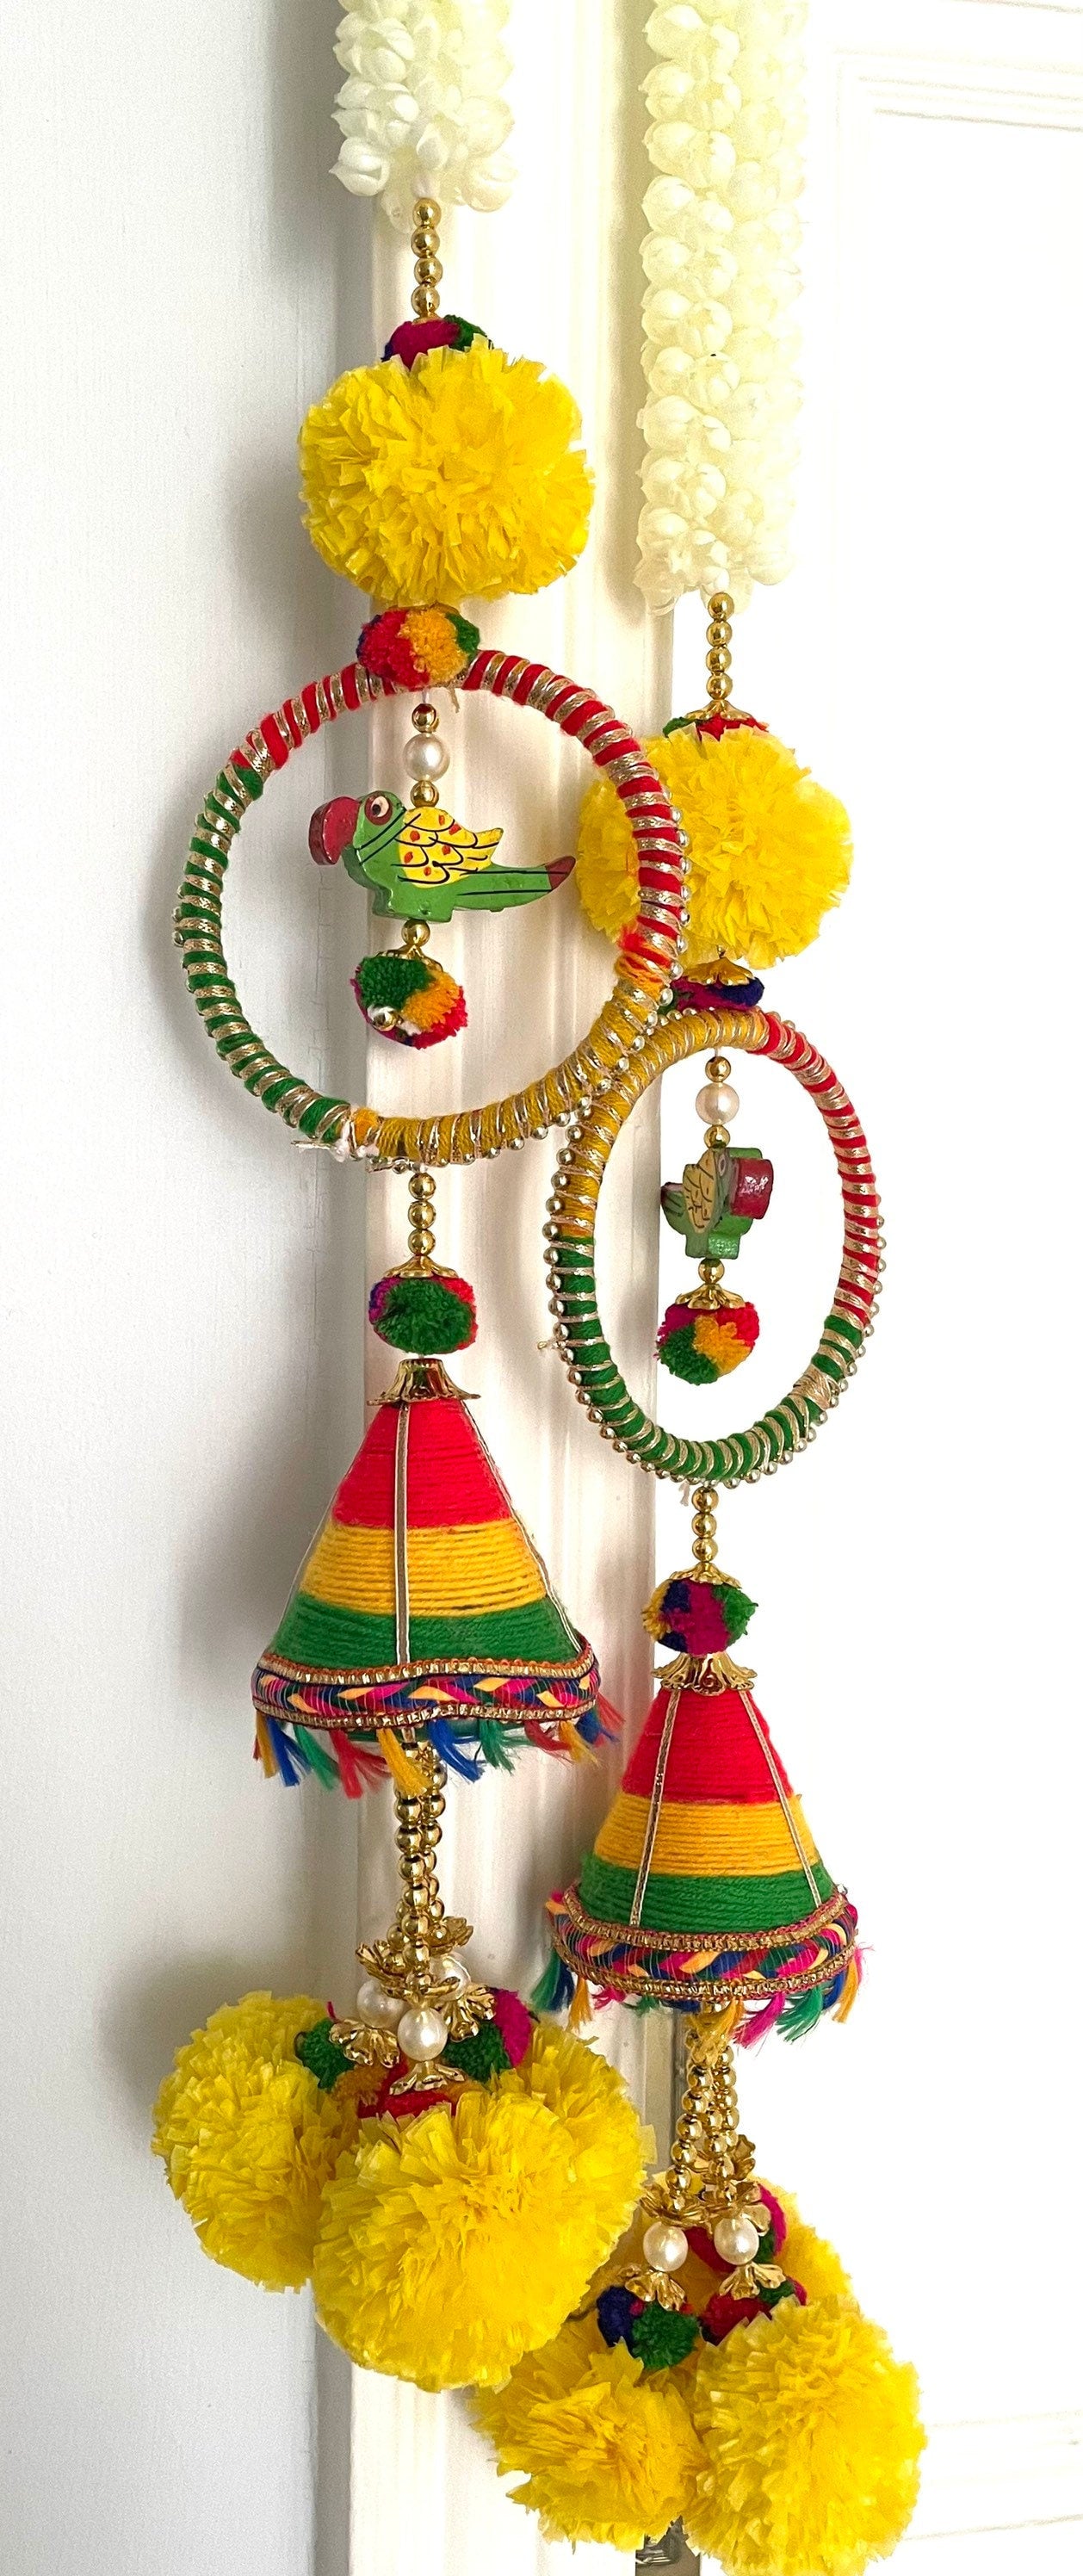 Pair of Parrot Mithoo Door Hanging Strings for Diwali Decoration Outdoor Backdrops Event Weddings Home Decor New Home